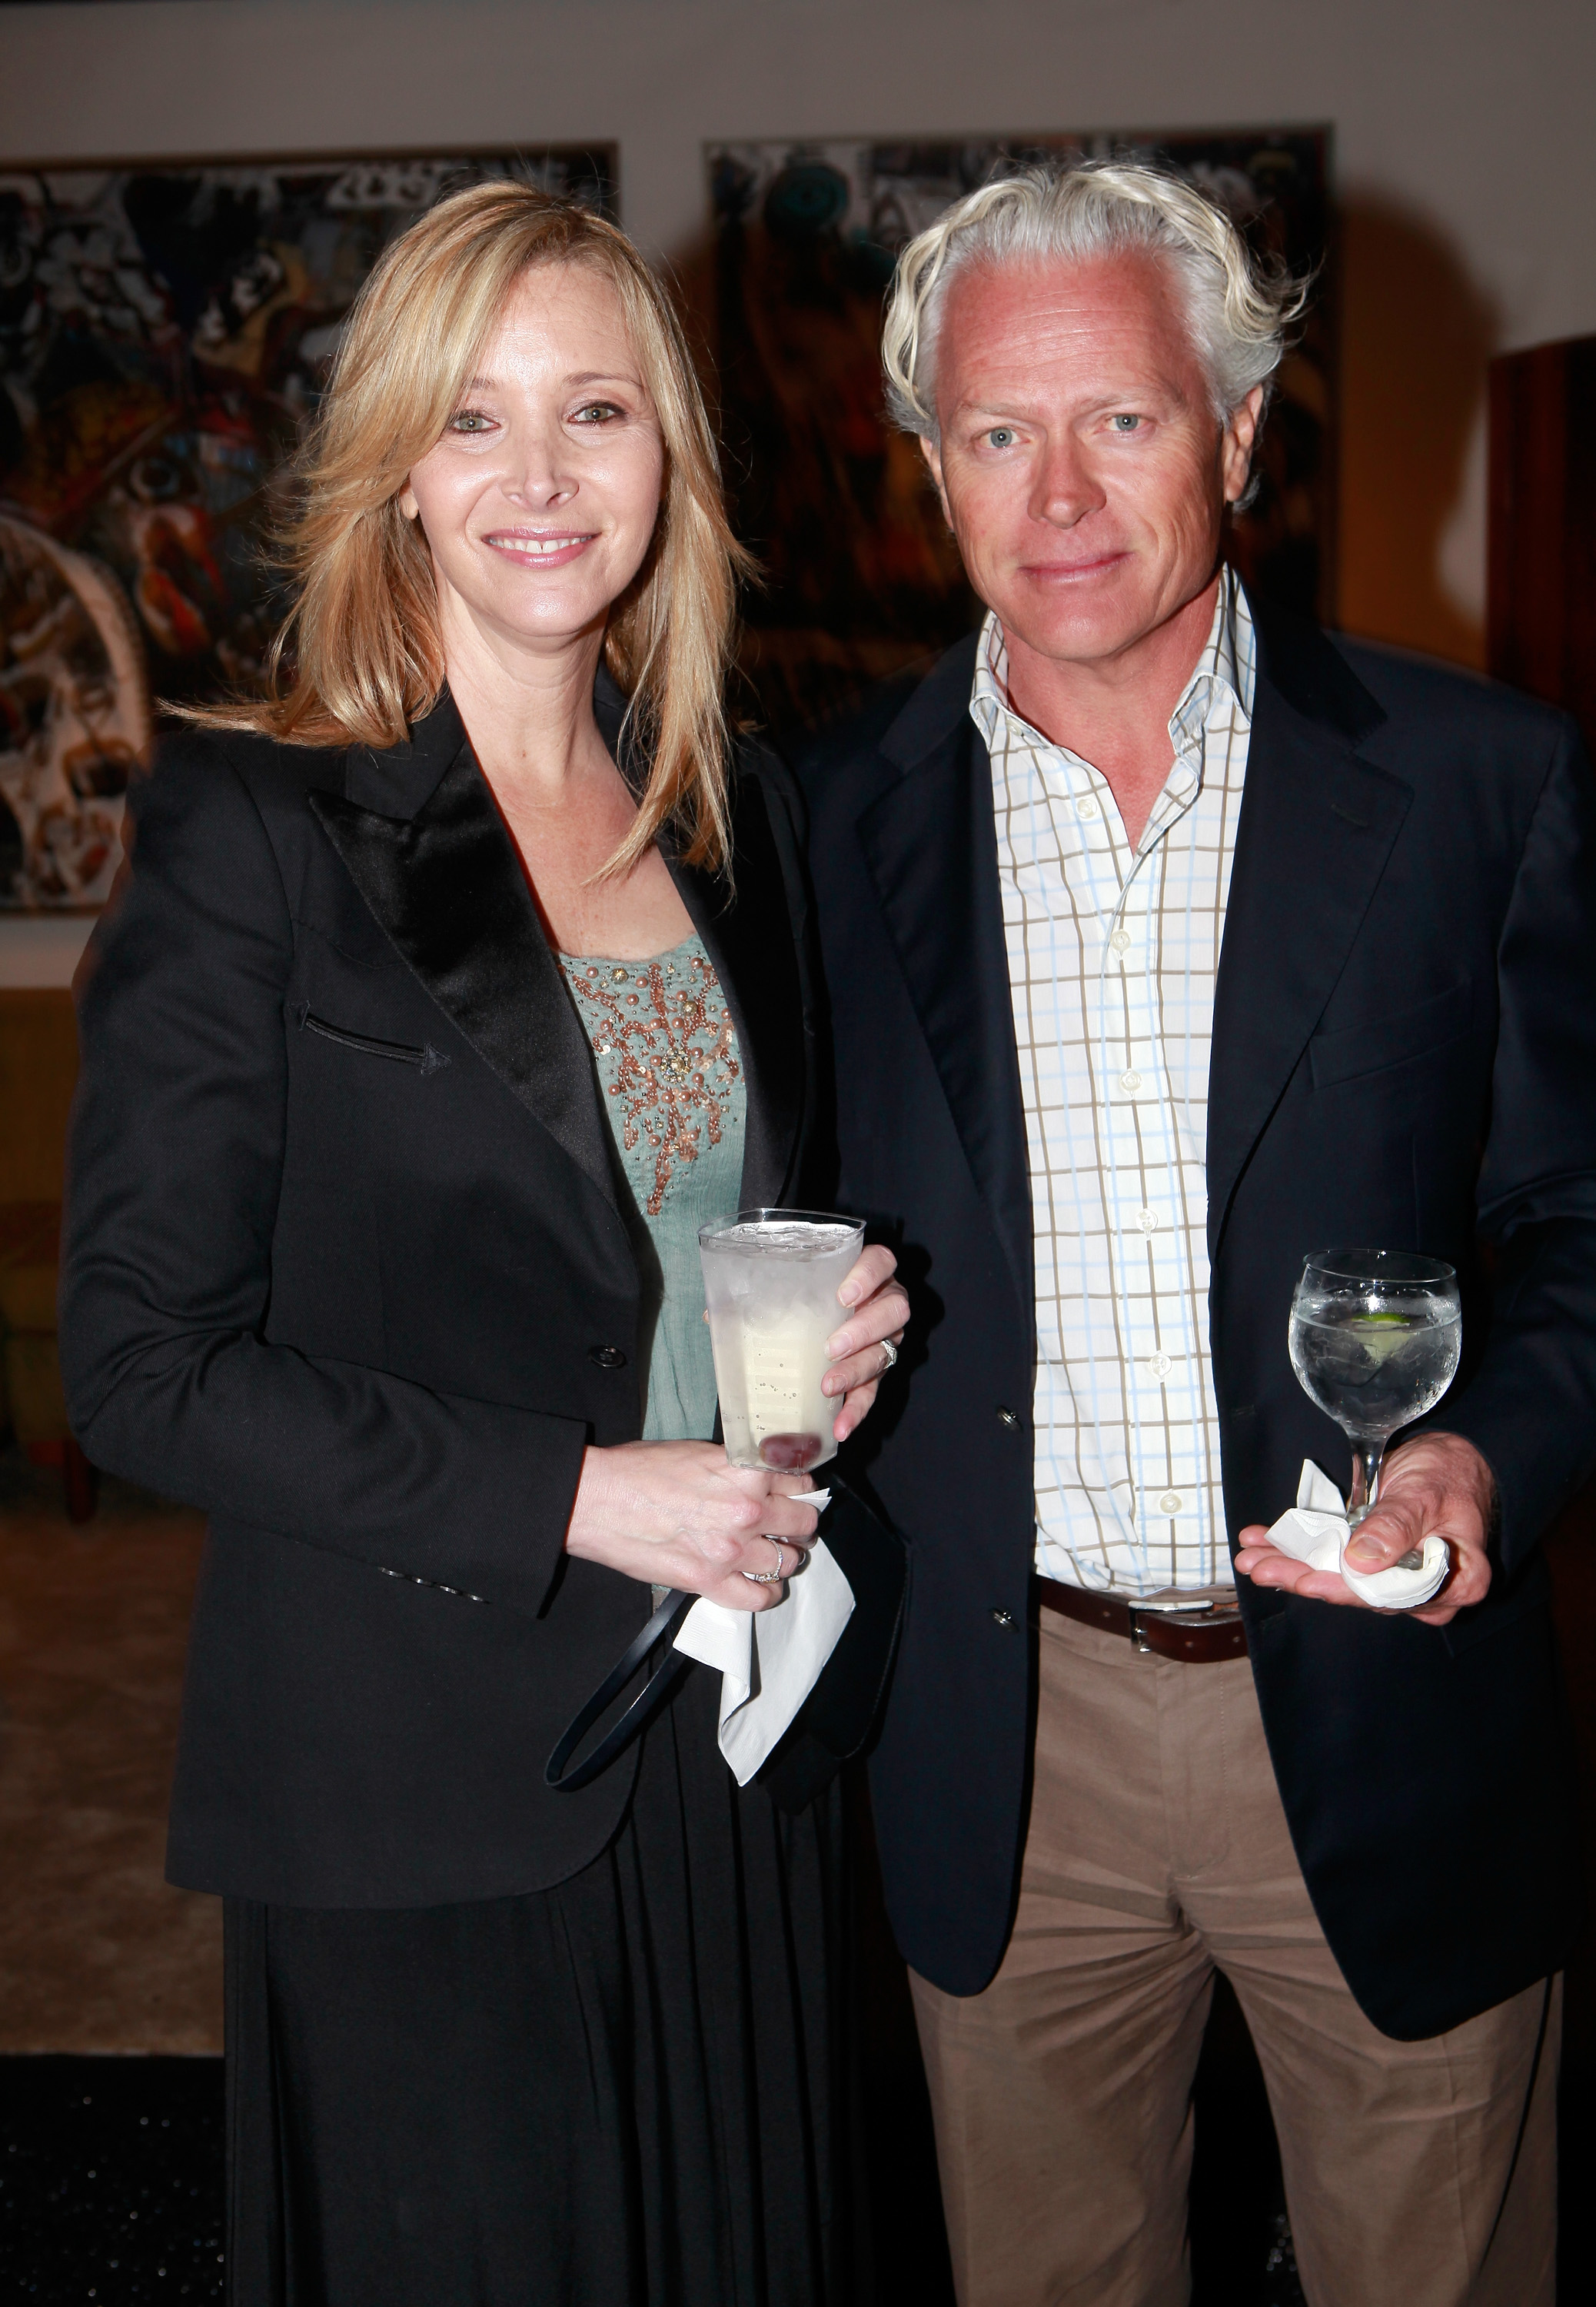 Lisa Kudrow and her husband Michel Stern during the LA Modernism show opening night in Santa Monica, California on April 25, 2013 | Source: Getty Images